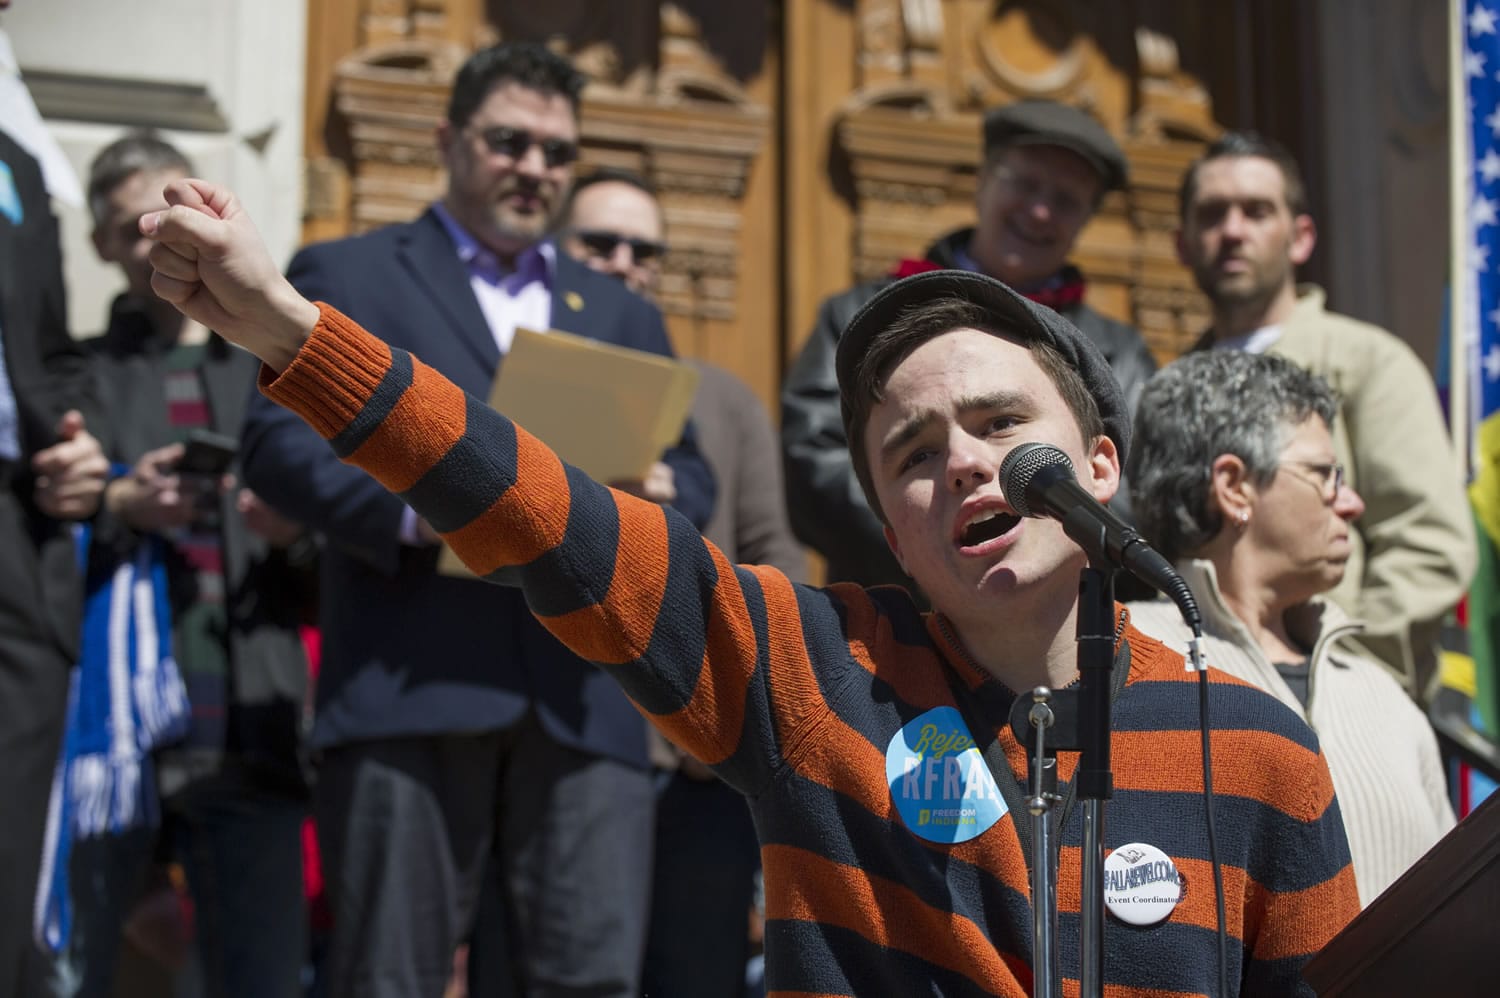 FILE - In this March 28, 2015, file photo, Jackson Blanchard, of Indianapolis, leads the crowd in a chant during a rally against  a new Indiana religious objections law outside the State House in Indianapolis. An intense debate over gay rights already is shaping up in Indiana, where a religious-rights law passed last spring thrust the state into the national spotlight over concerns it could sanction discrimination against gays and lesbians.